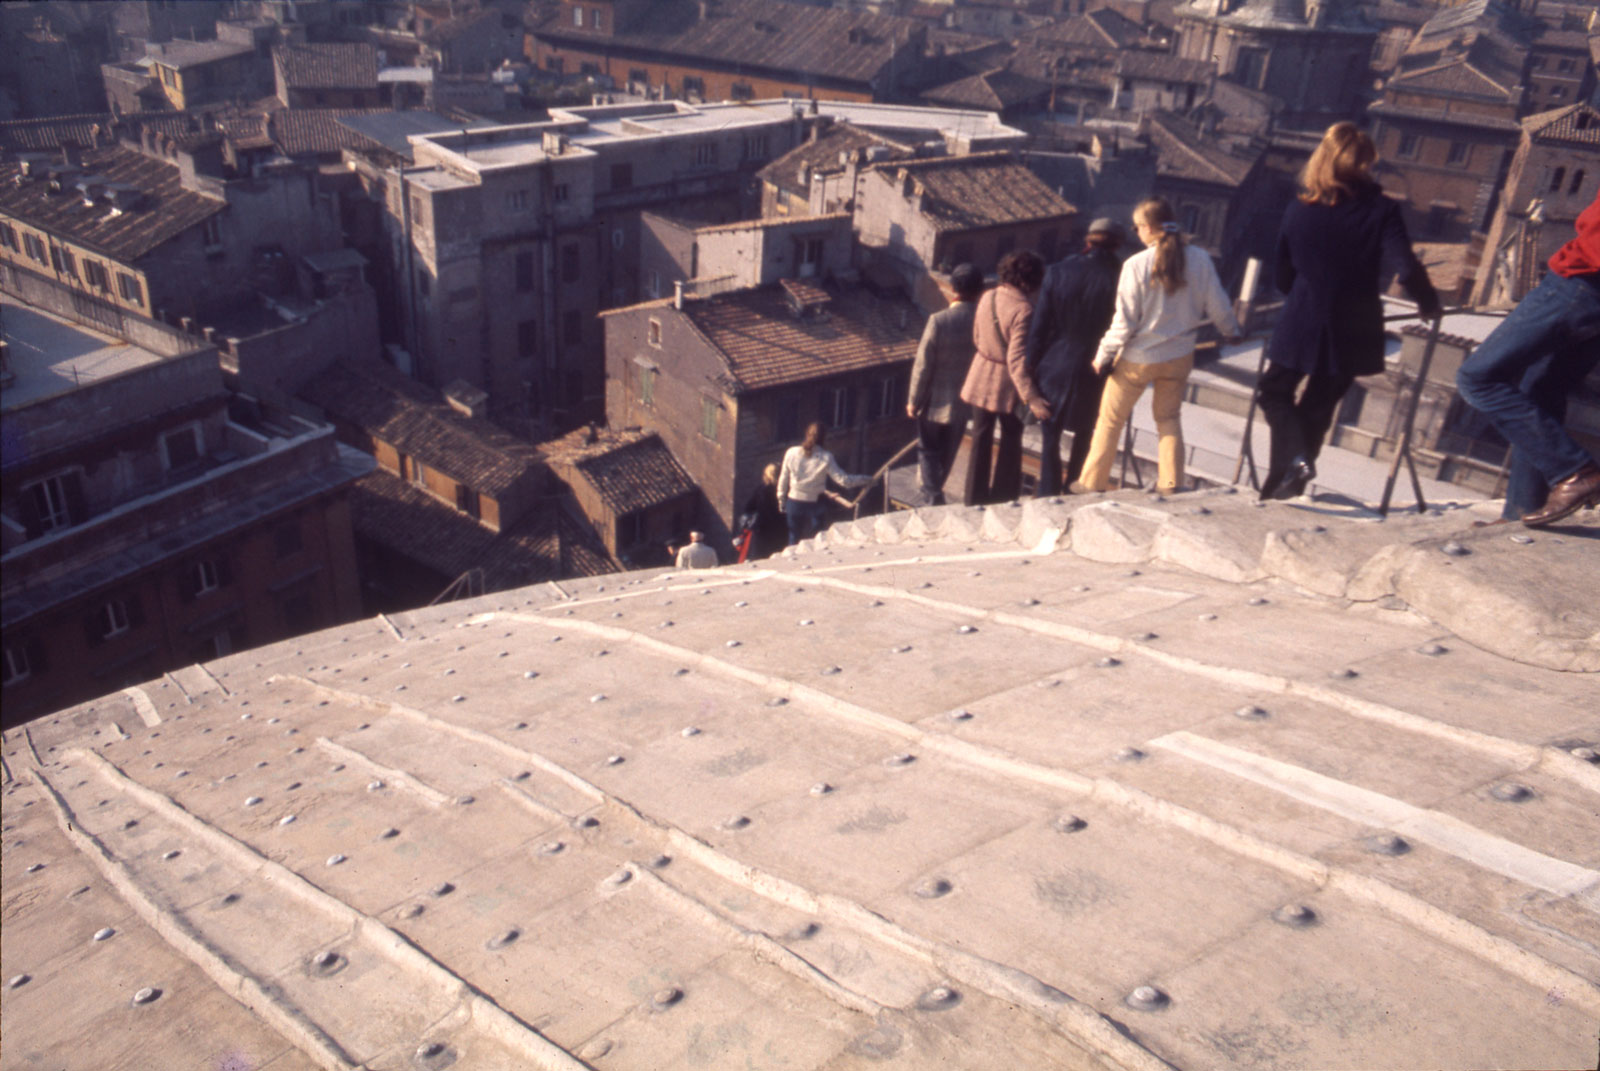 A group from the American Academy in Rome descending the Pantheon’s roof, circa 1975